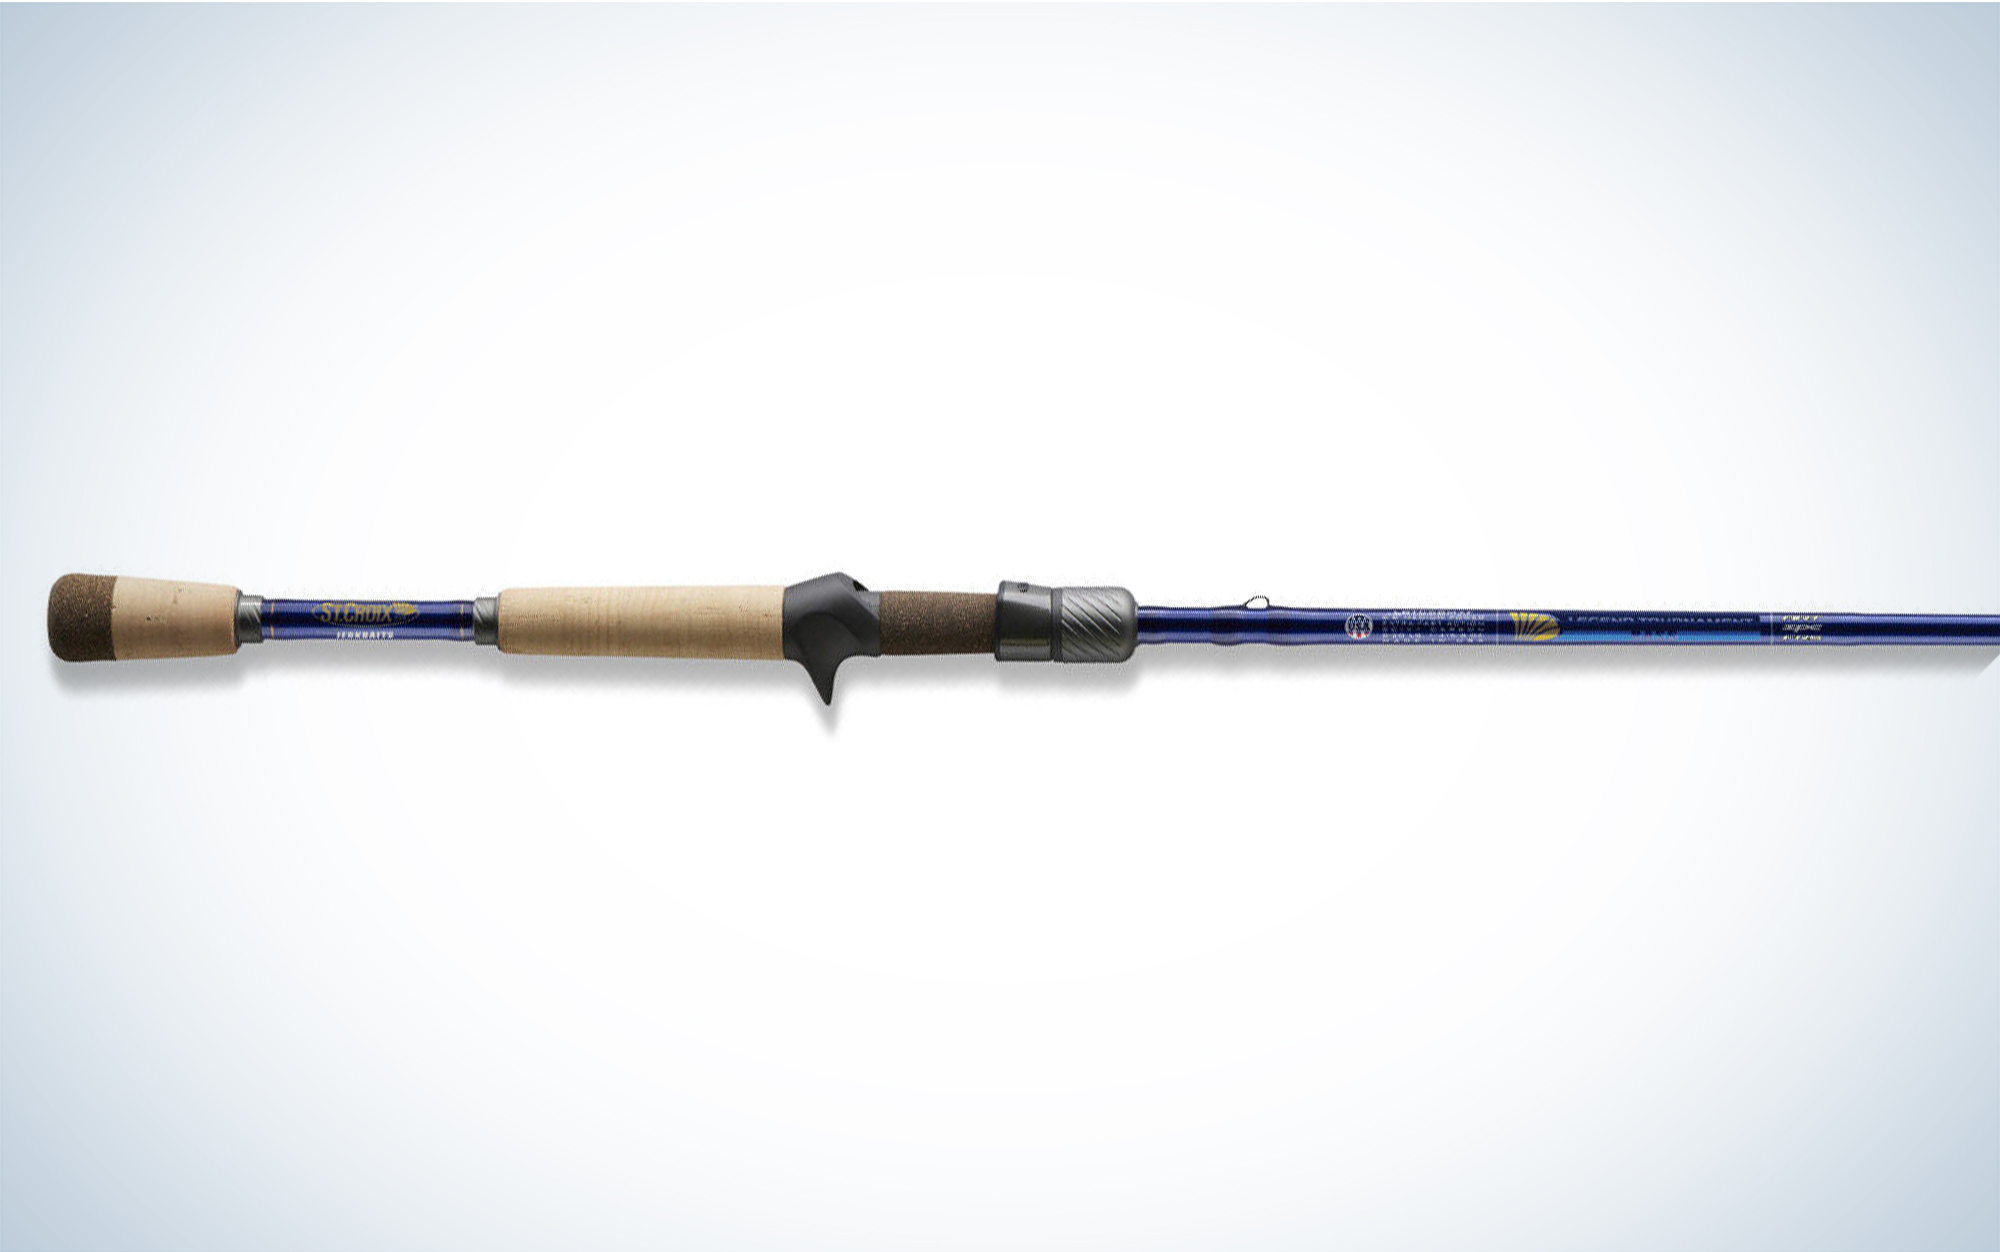 We tested the St. Croix Legend Tournament Casting Rod 6 feet, 8 inches.